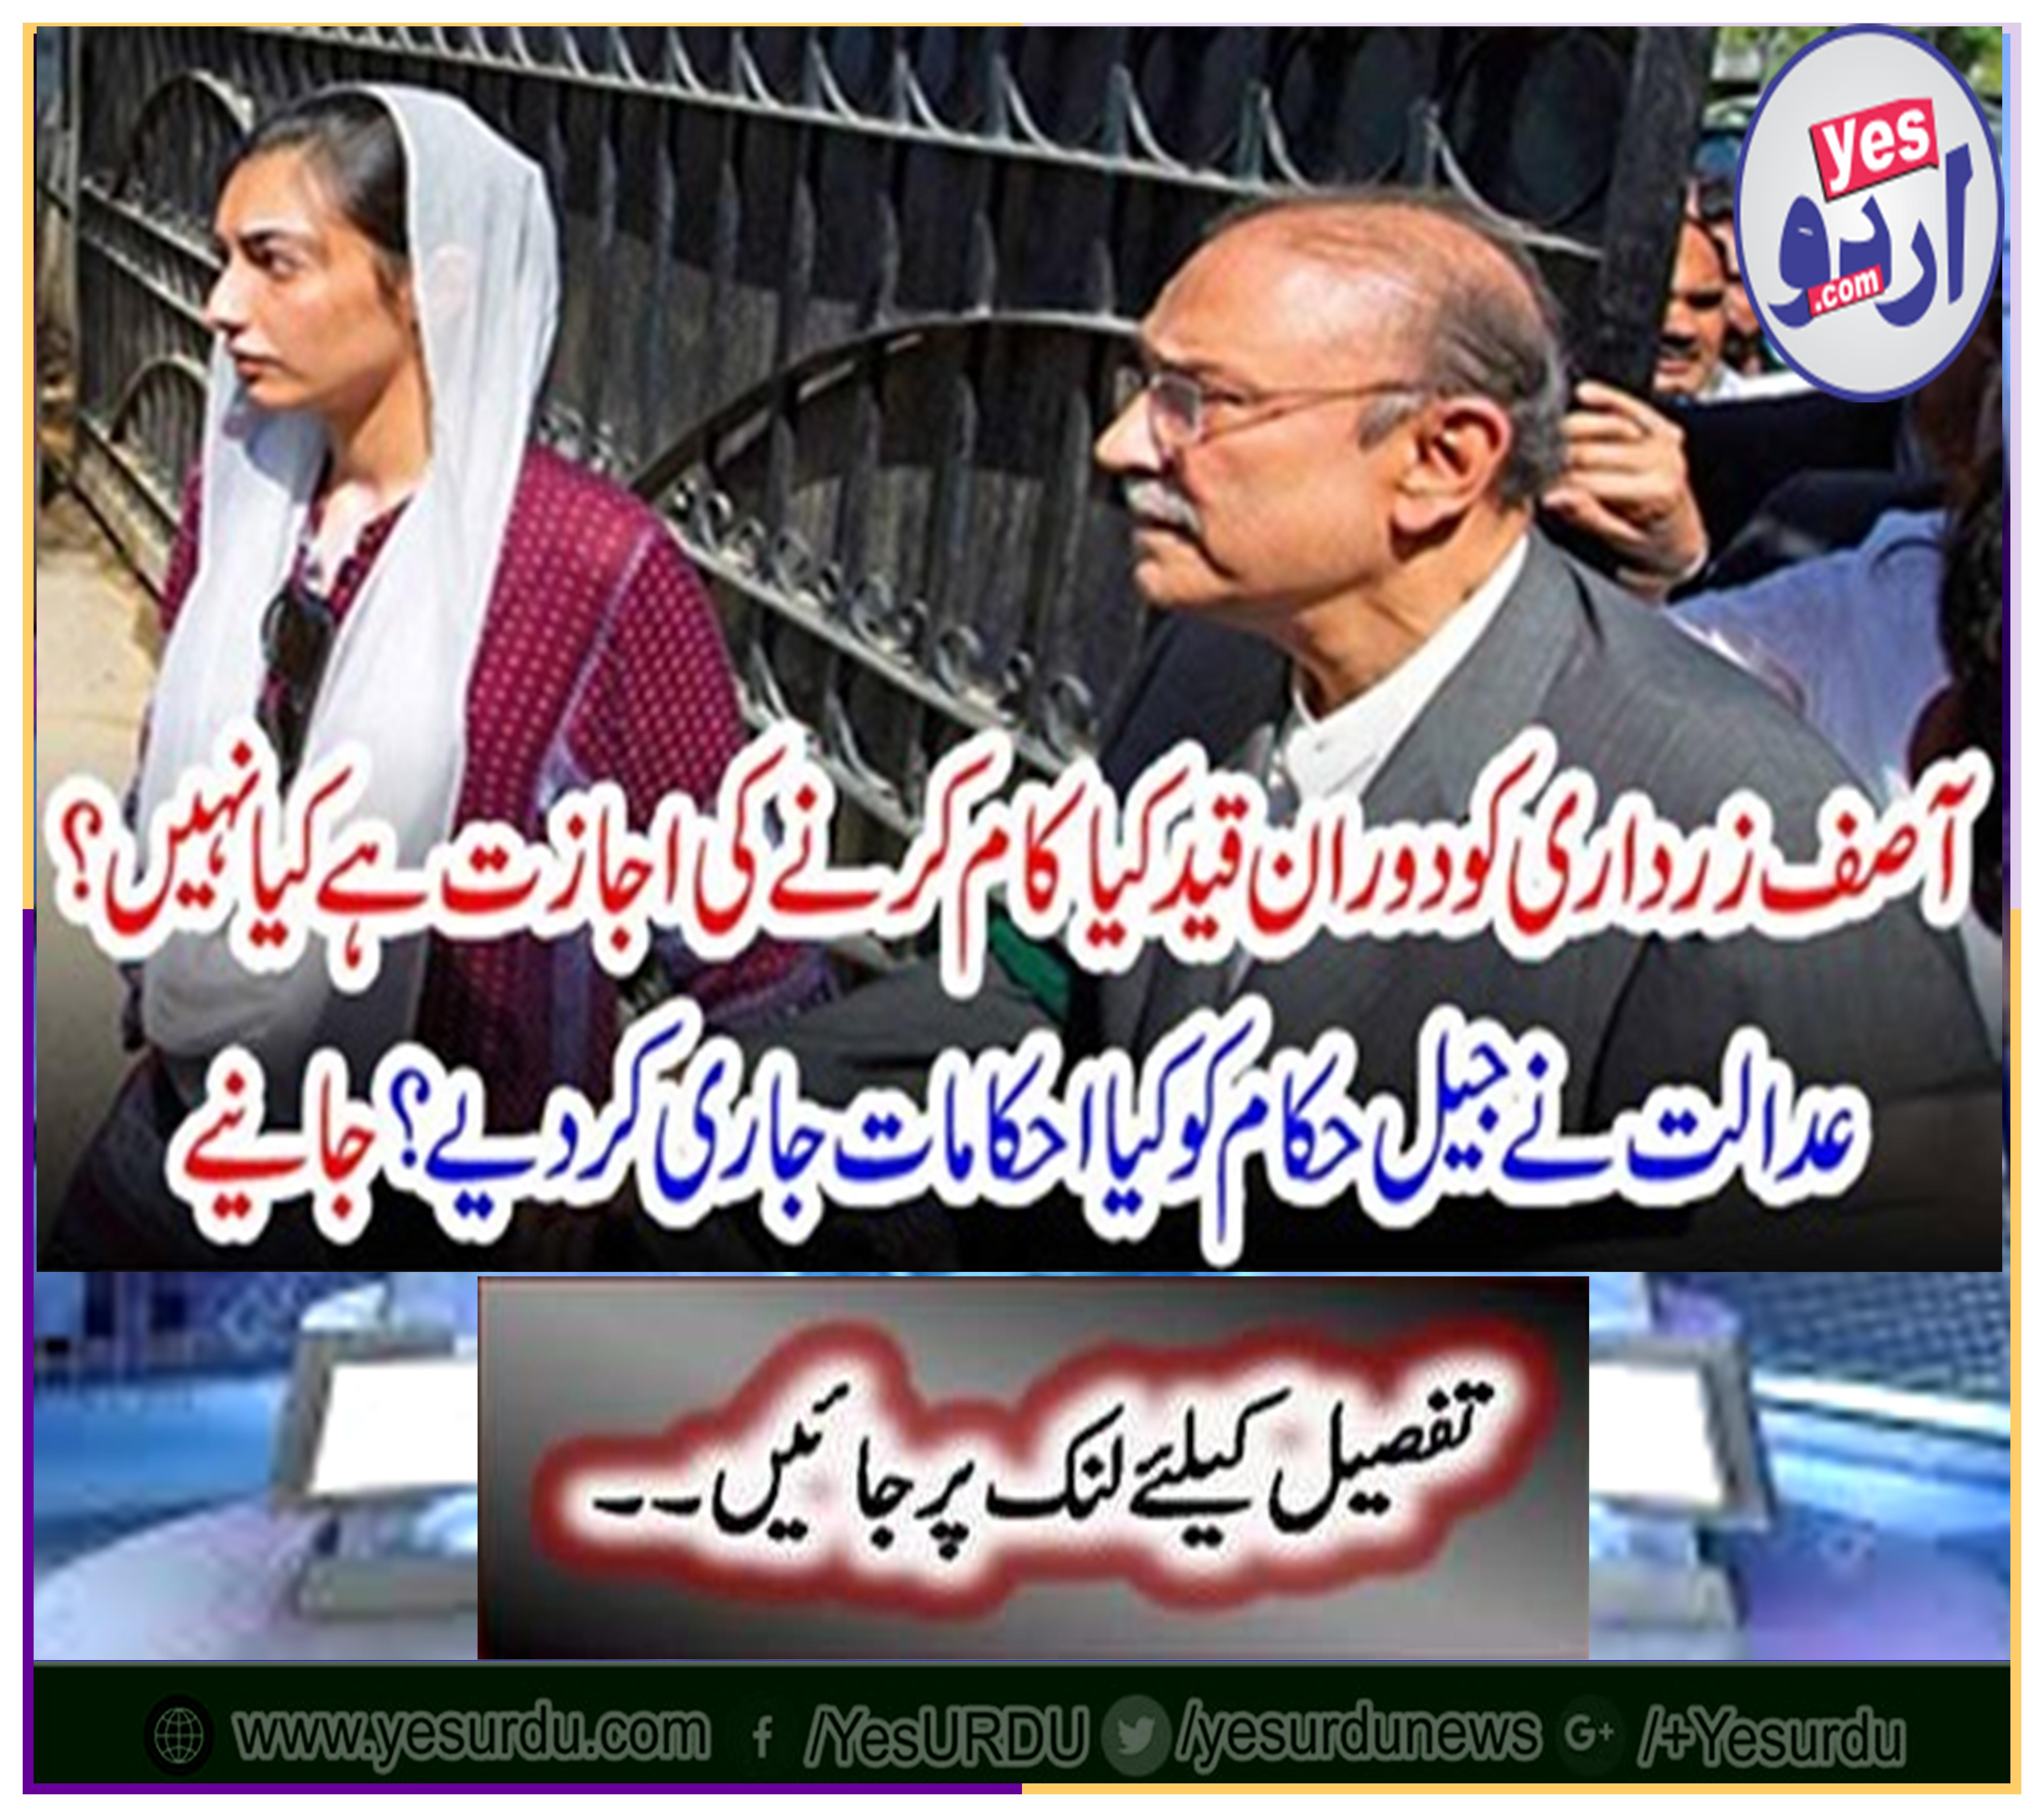 Asif Zardari is not allowed to work while imprisoned? What orders has the court issued to the jail authorities? Learn